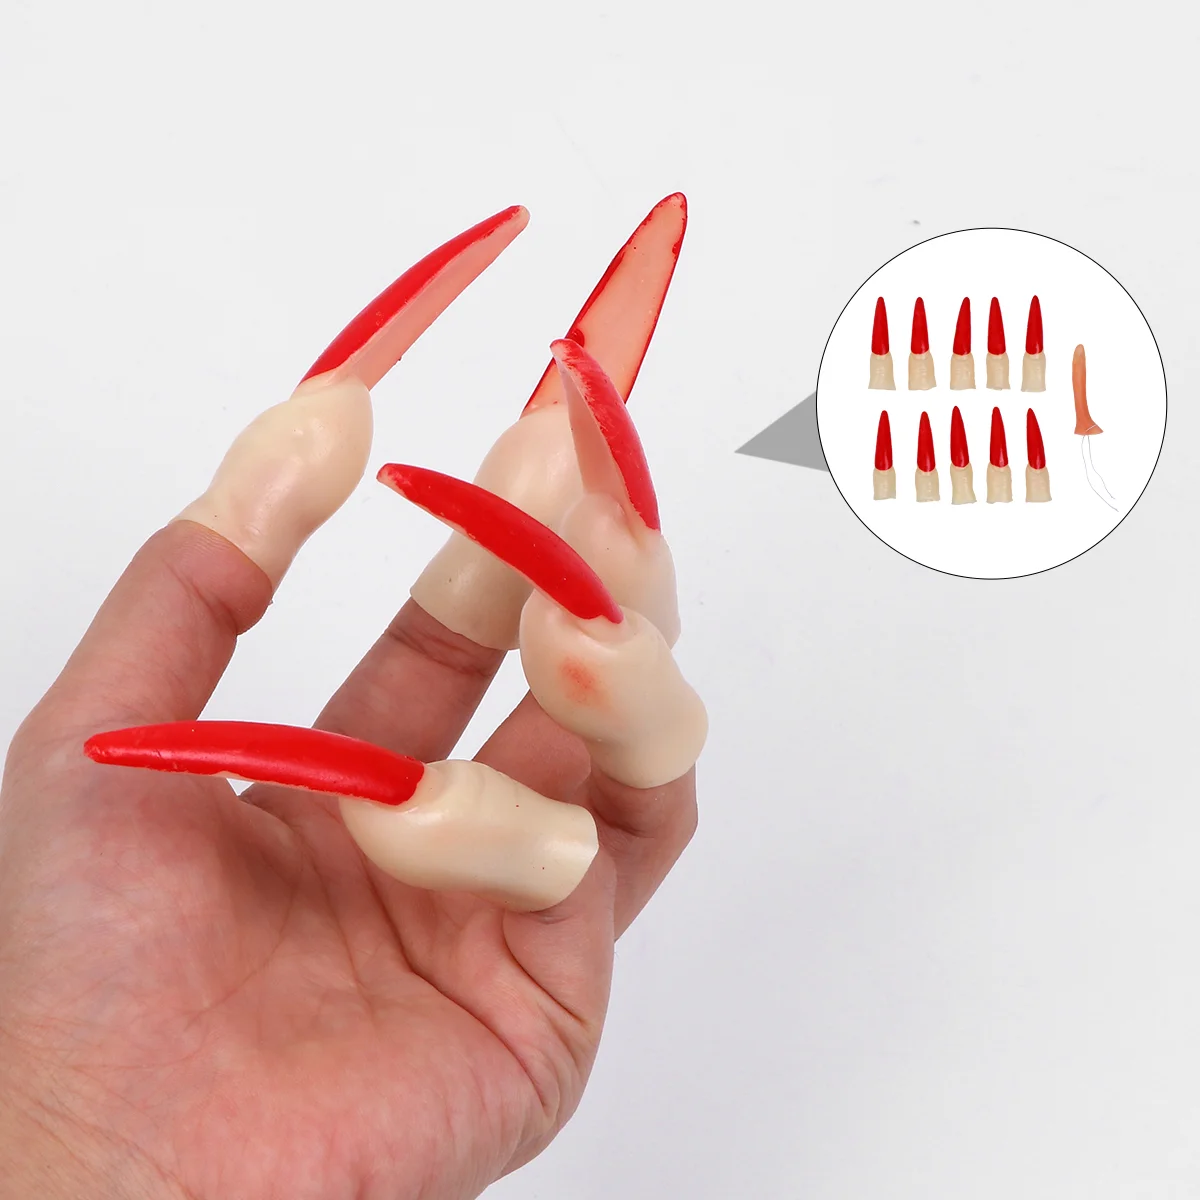 

Nails Witch Fake Finger Fingers Nailzombie Claws Claw Cover Costume False Role Play Scaryvampire Gothic Bulk Cosplay Rings